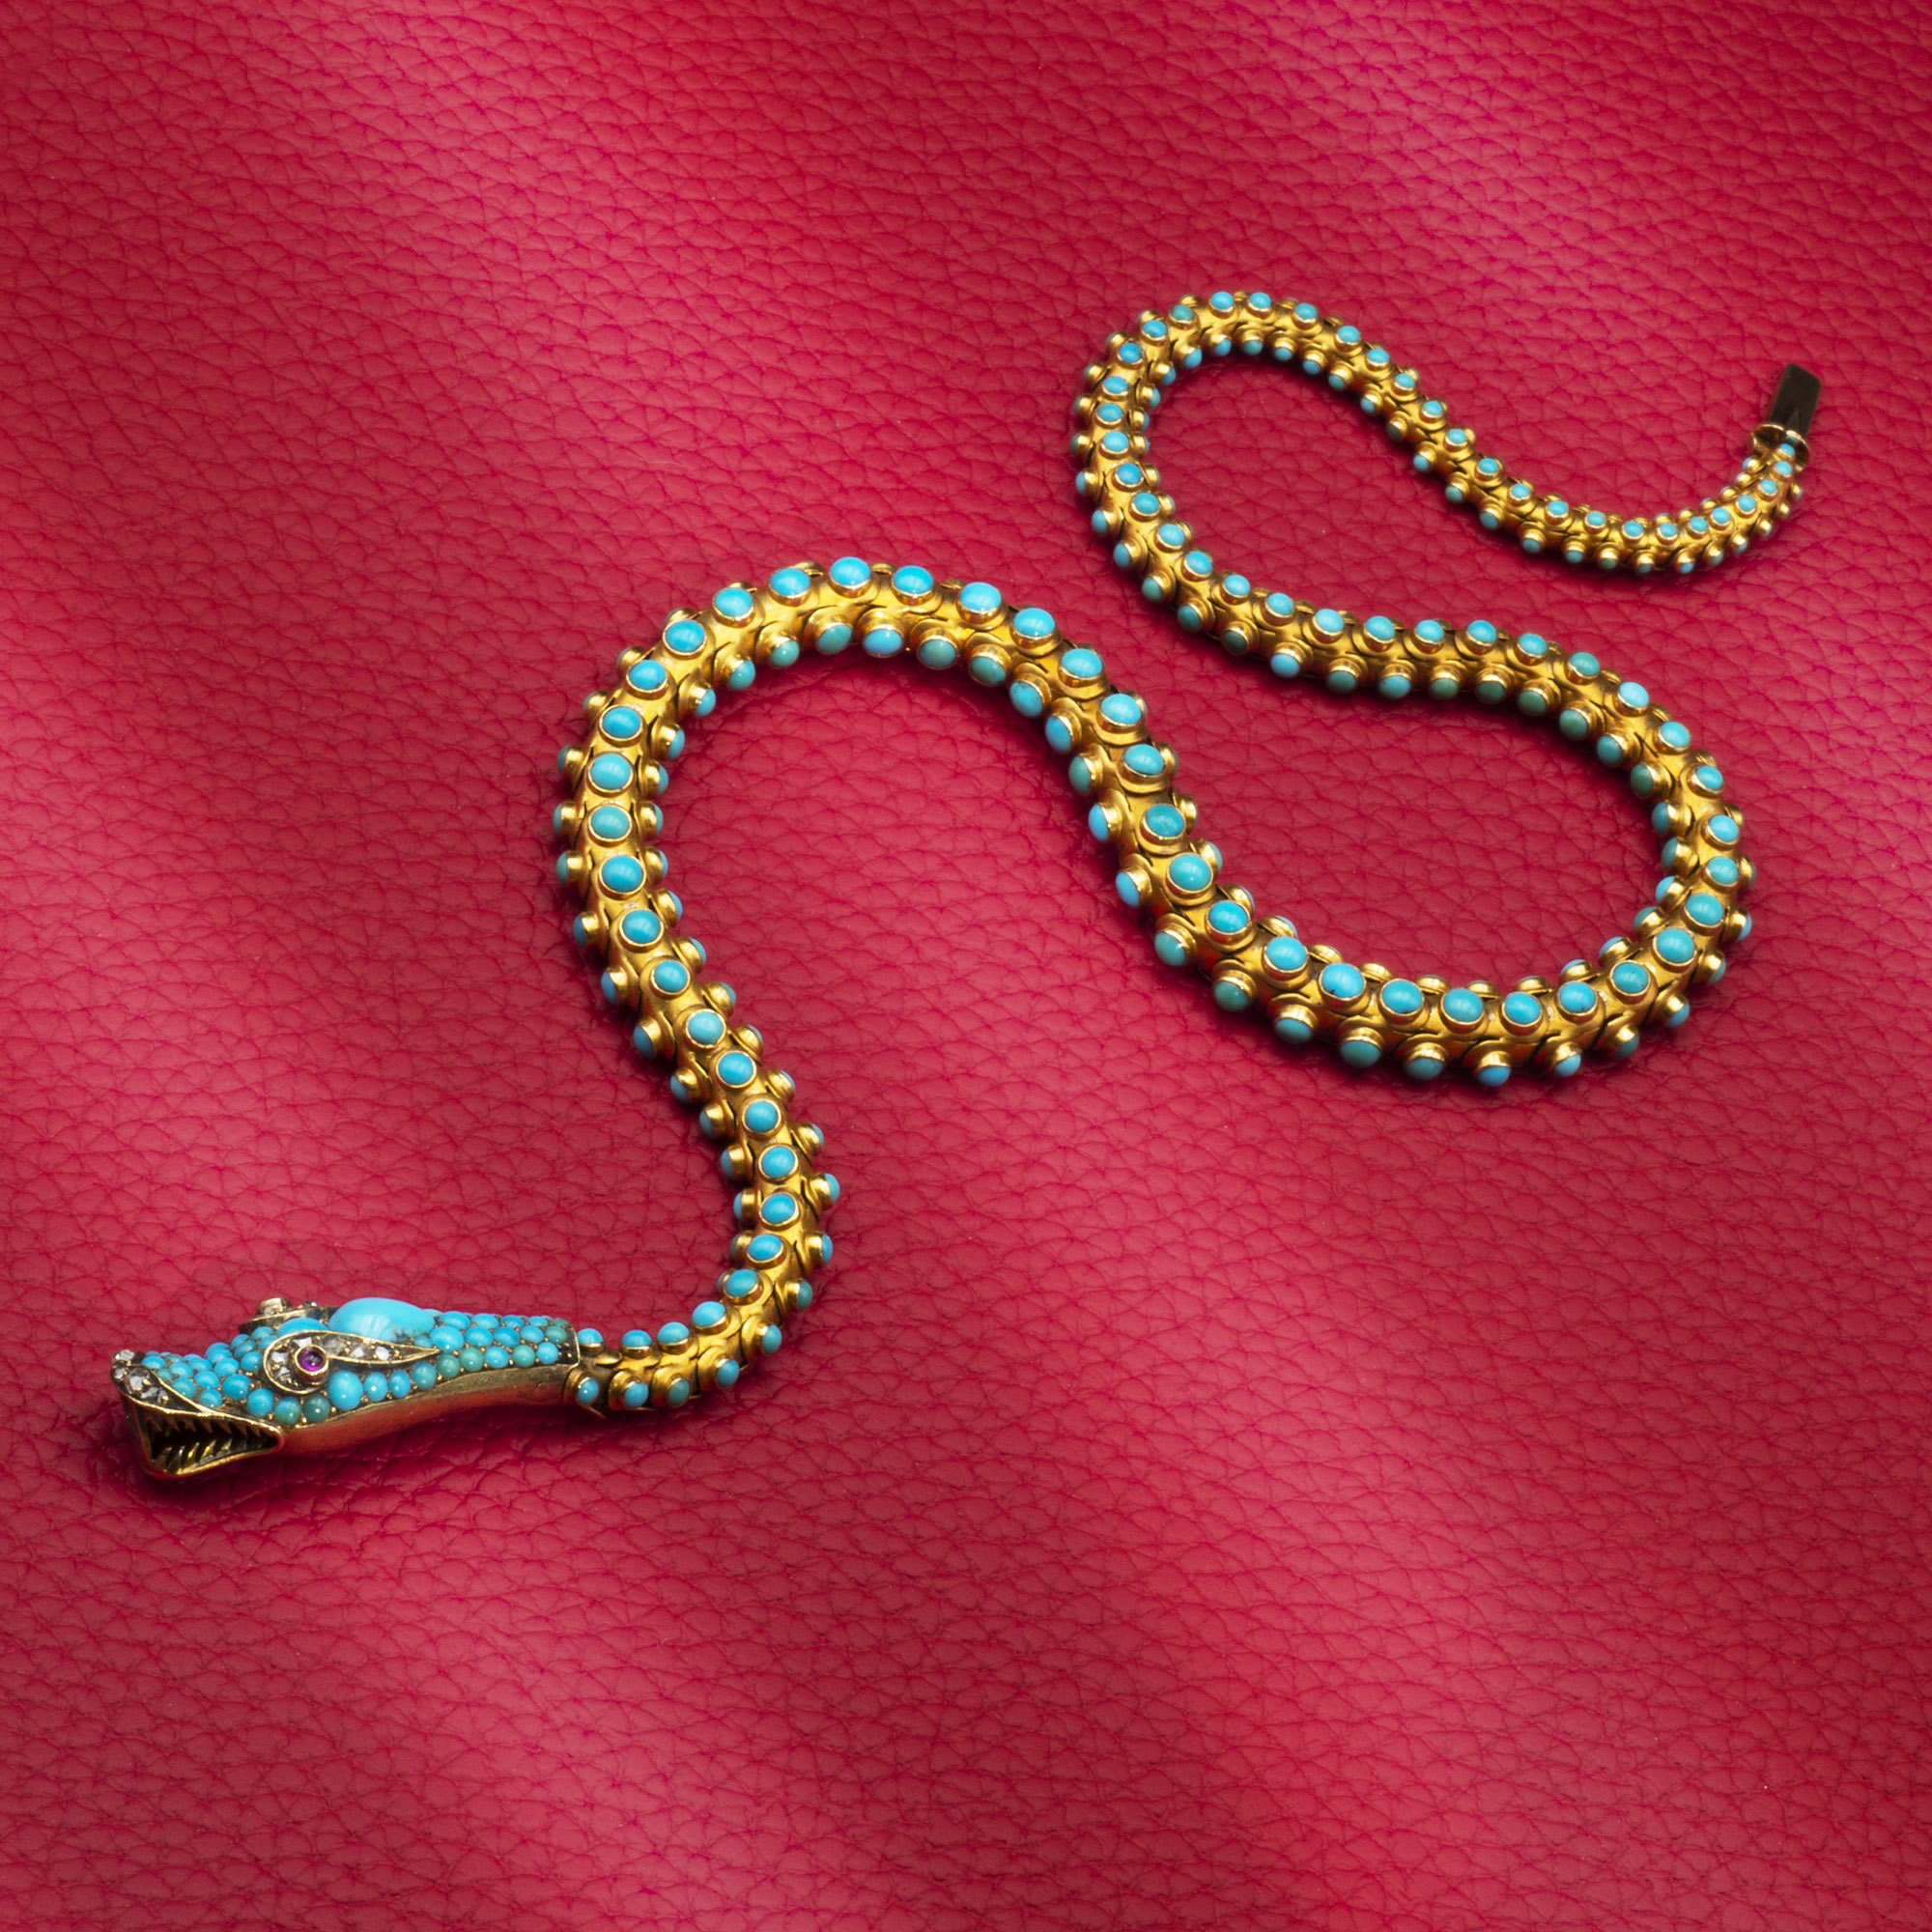 Picture of a snake neckplace, taken by Andrea Fabrizi, a high-skilled jewellery photographer in London.